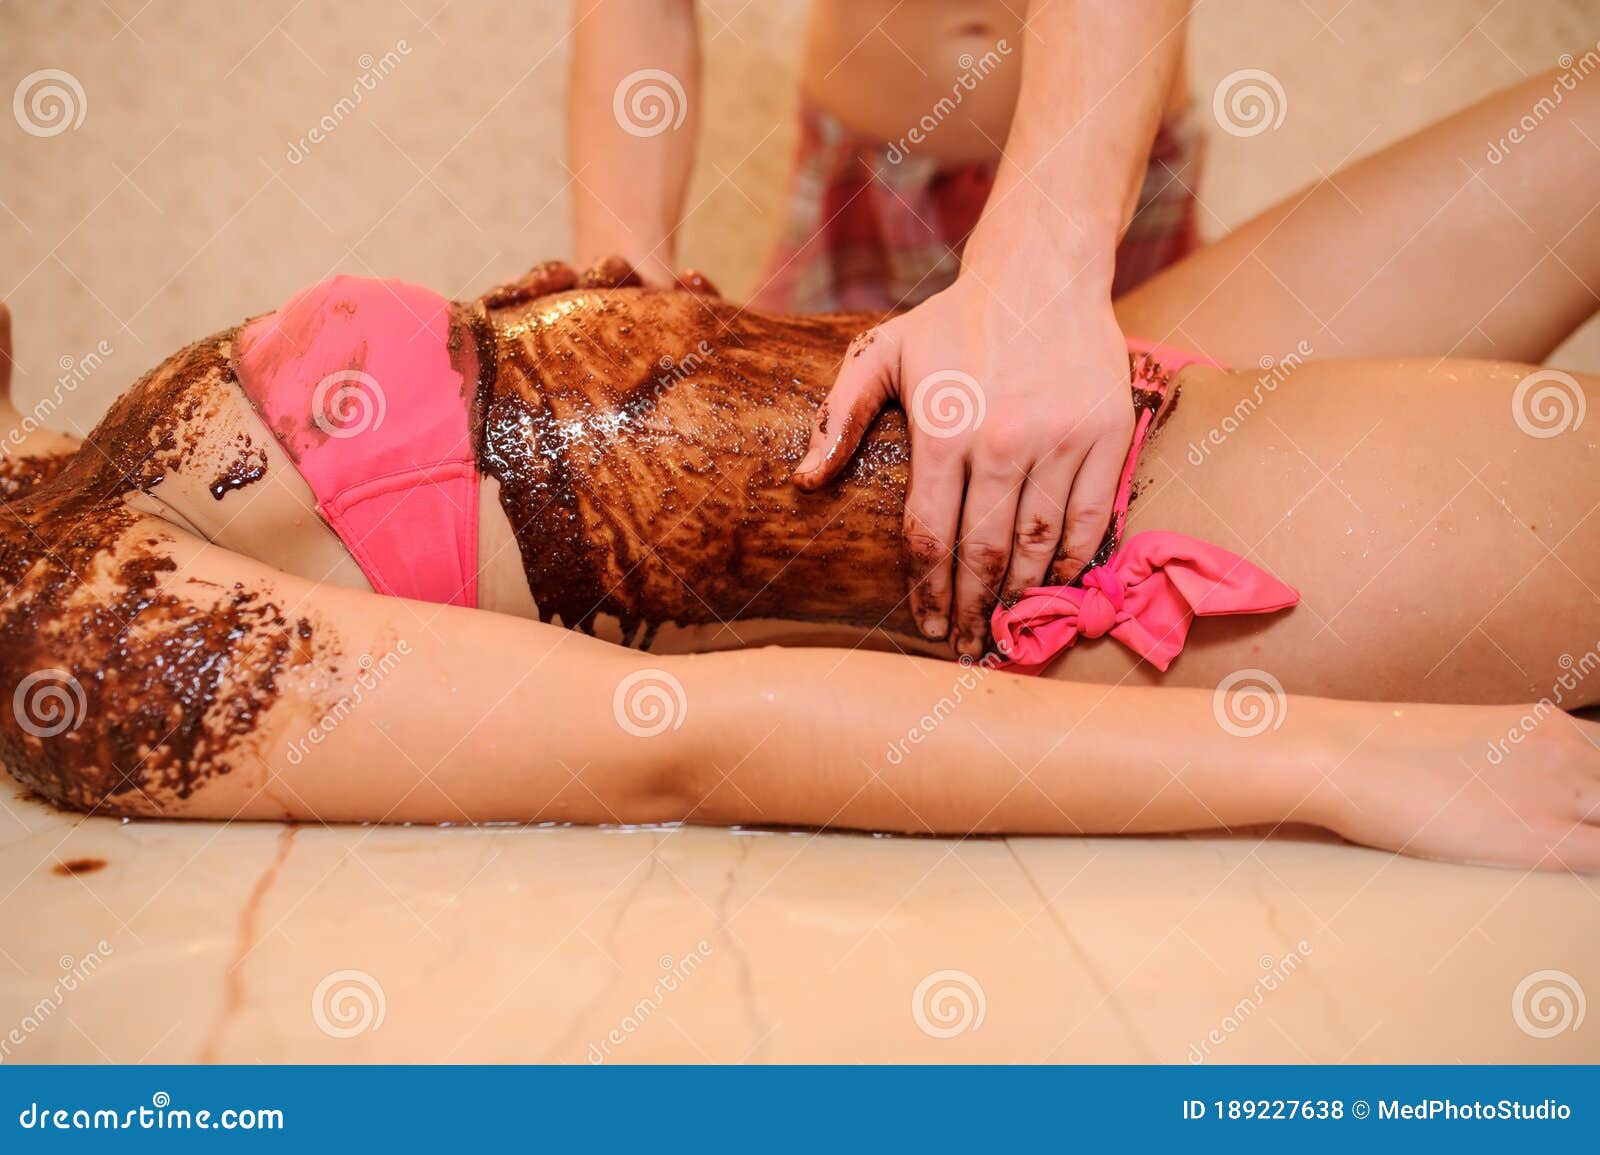 Young Woman Having A Chocolate Massage On Her Abdomen Done